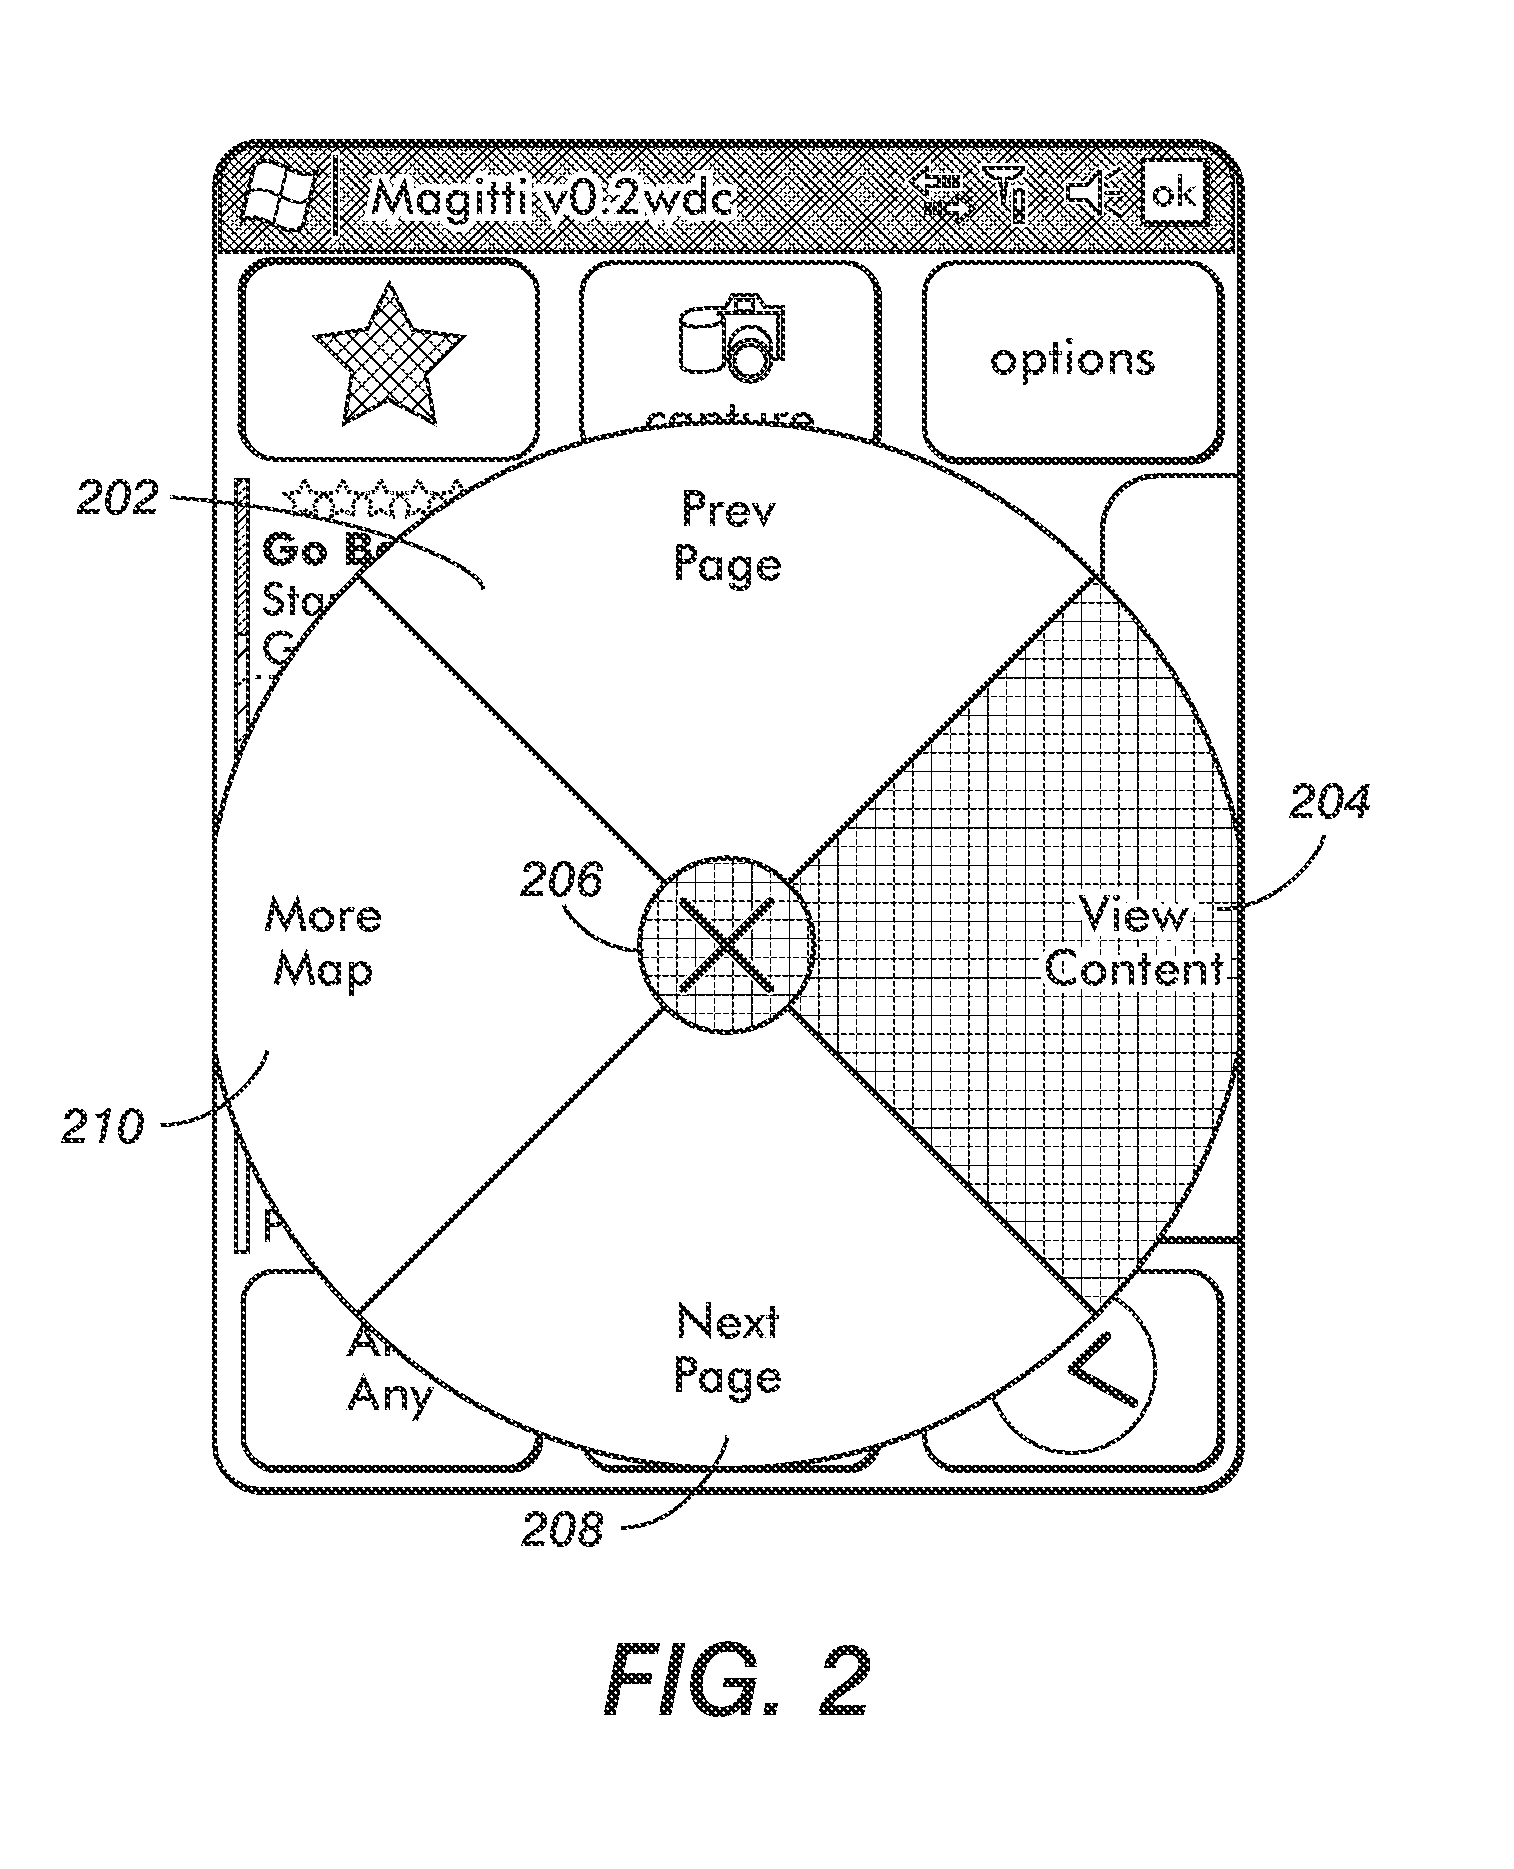 User interface for a context-aware leisure-activity recommendation system